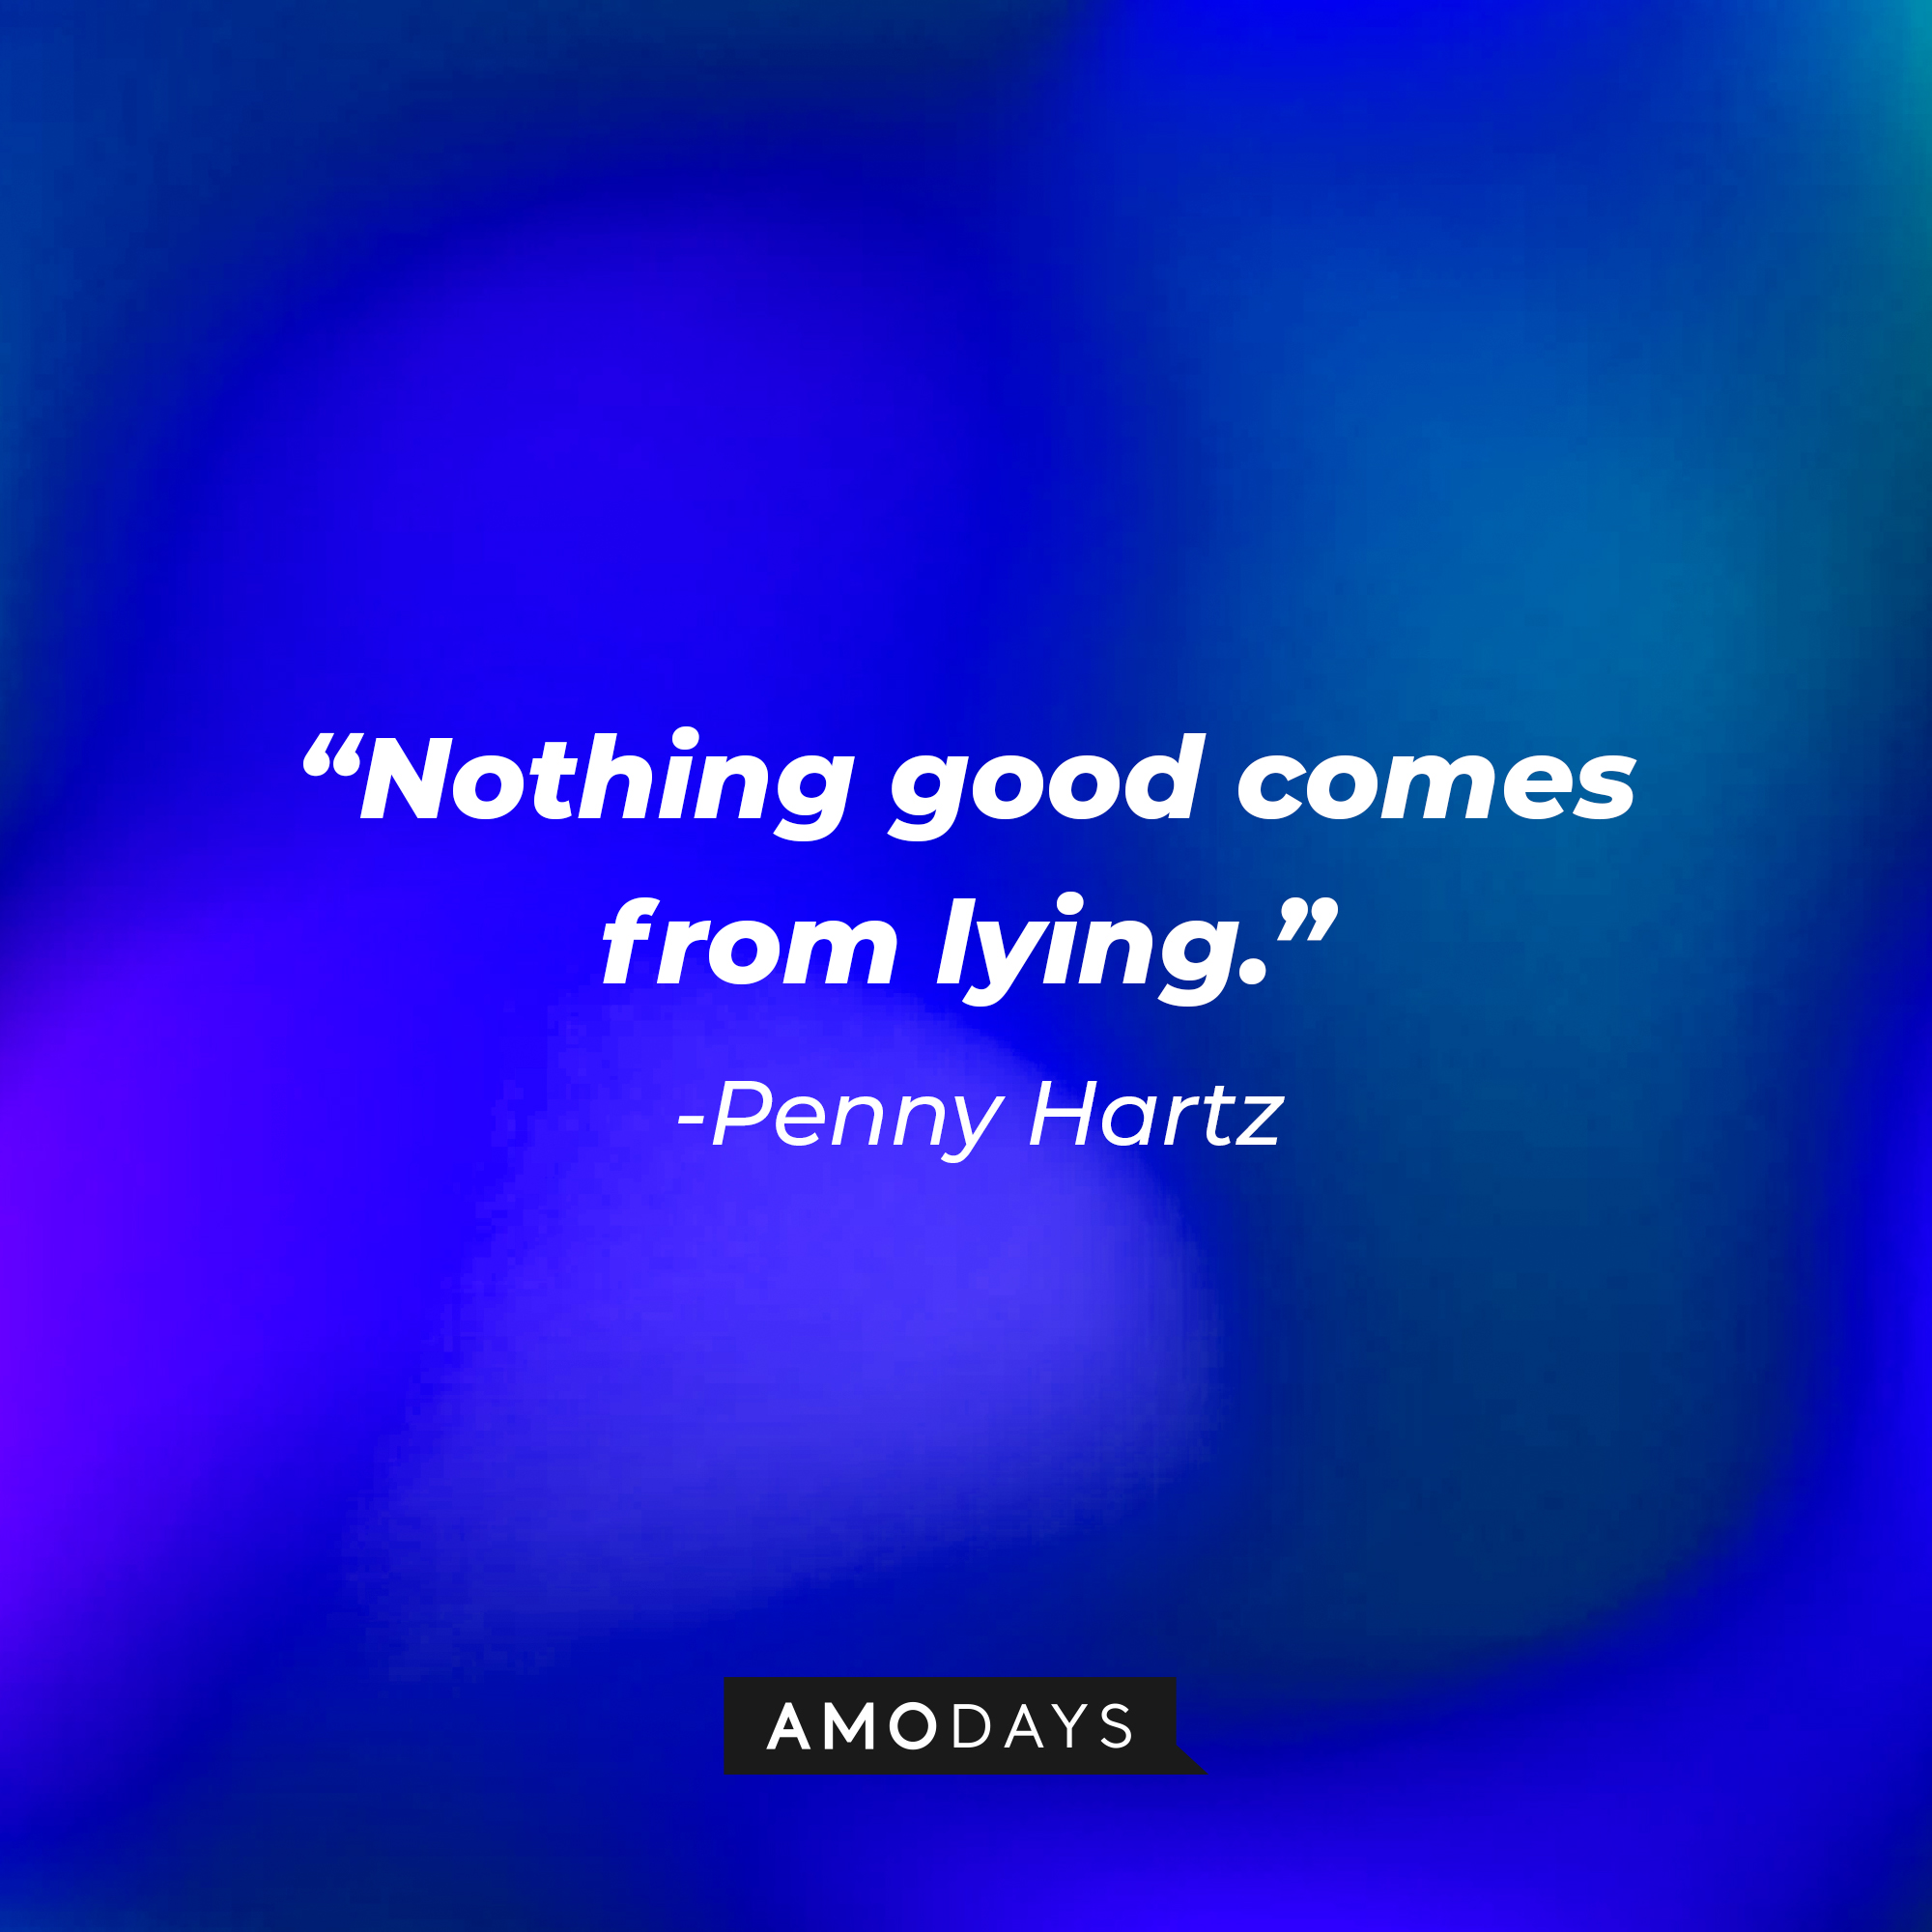 Penny Hartz's quote, "Nothing good comes from lying." | Source: Facebook/HappyEndings